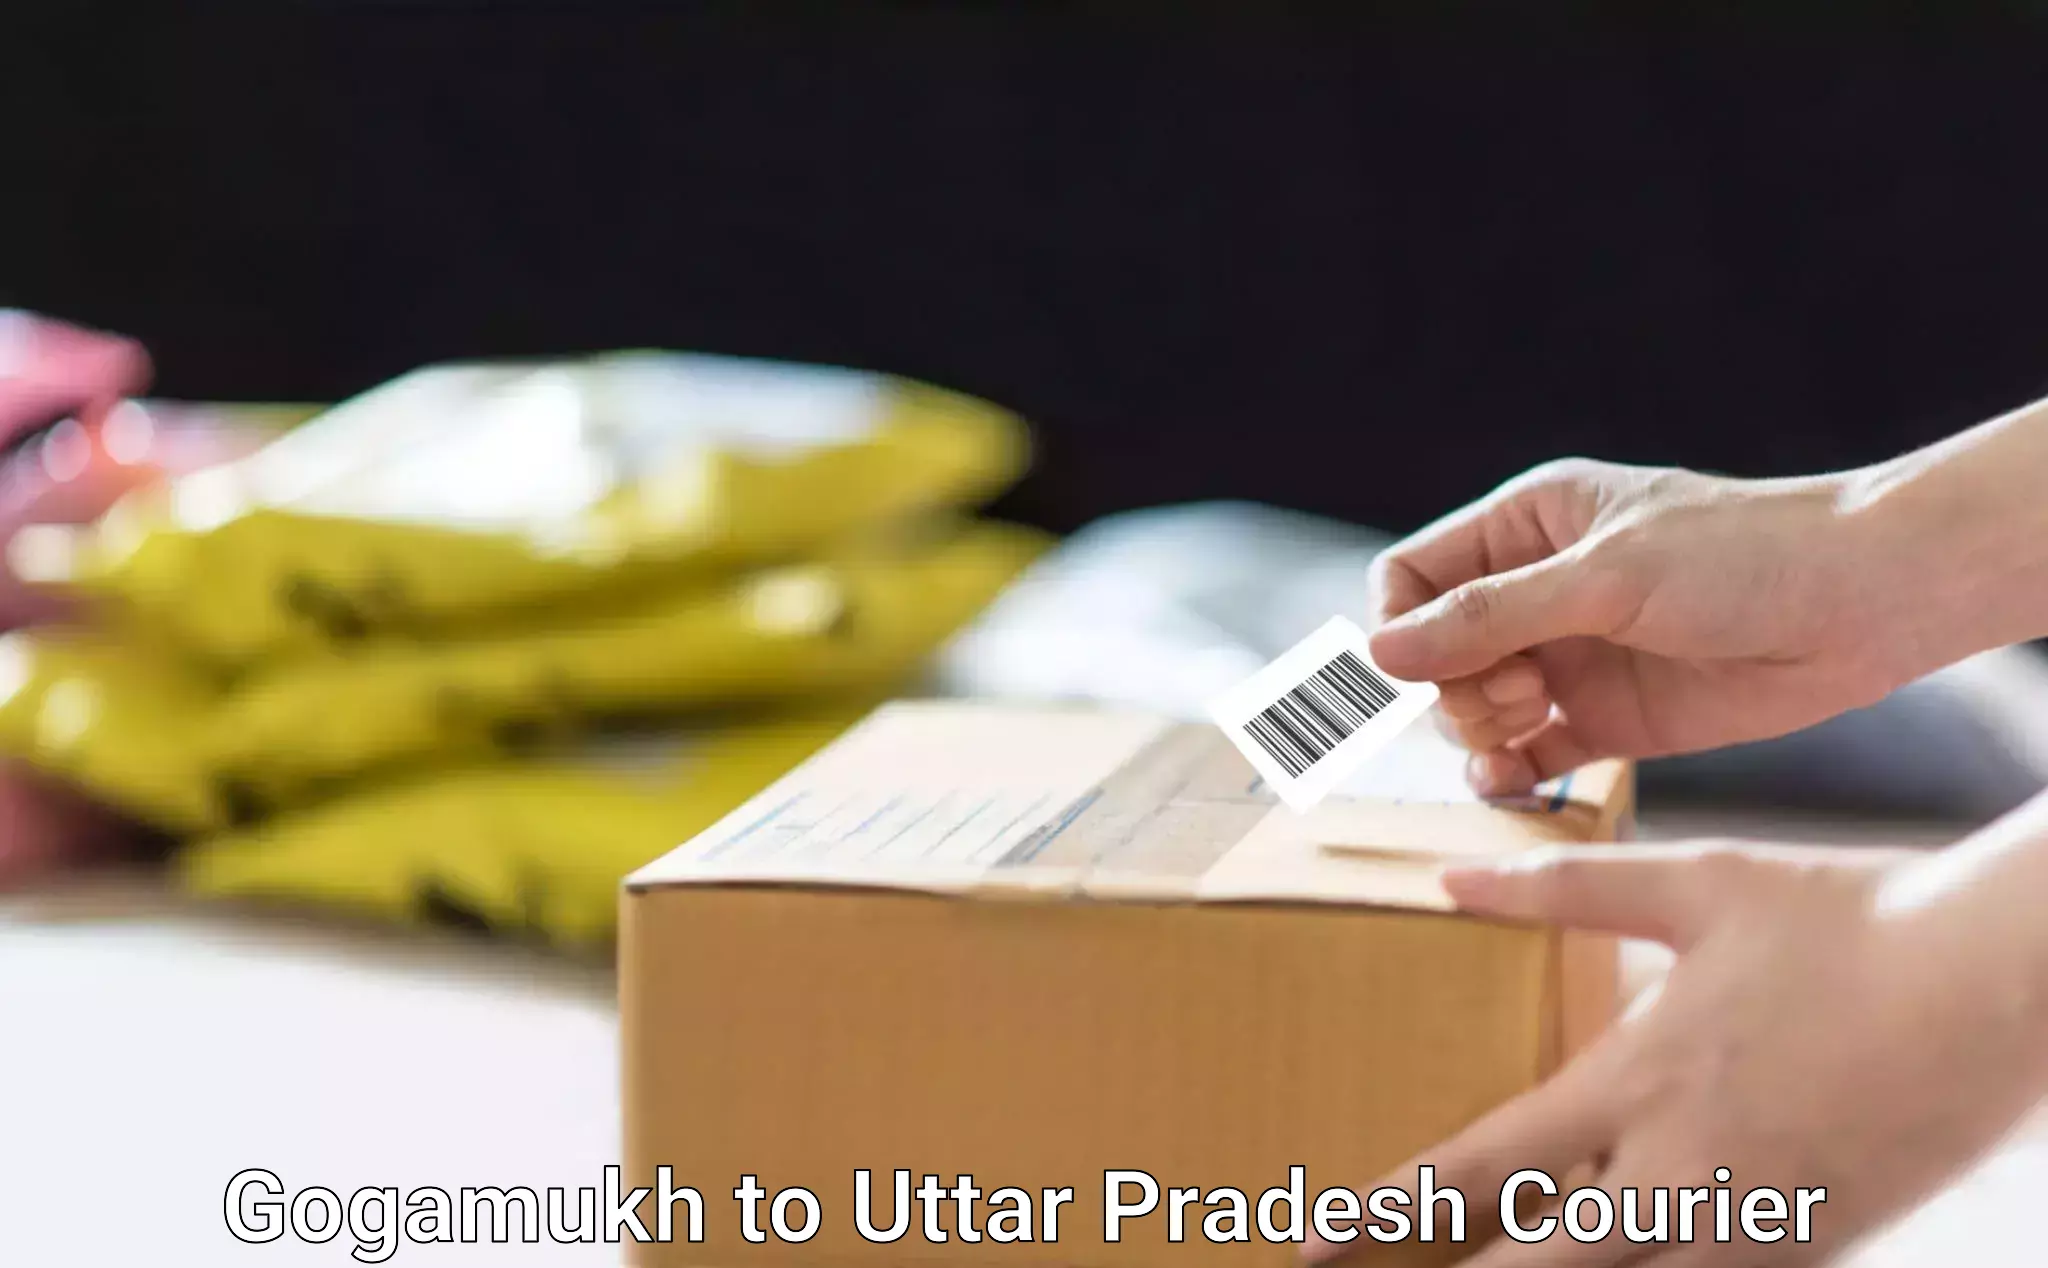 Next-day delivery options Gogamukh to IIIT Lucknow